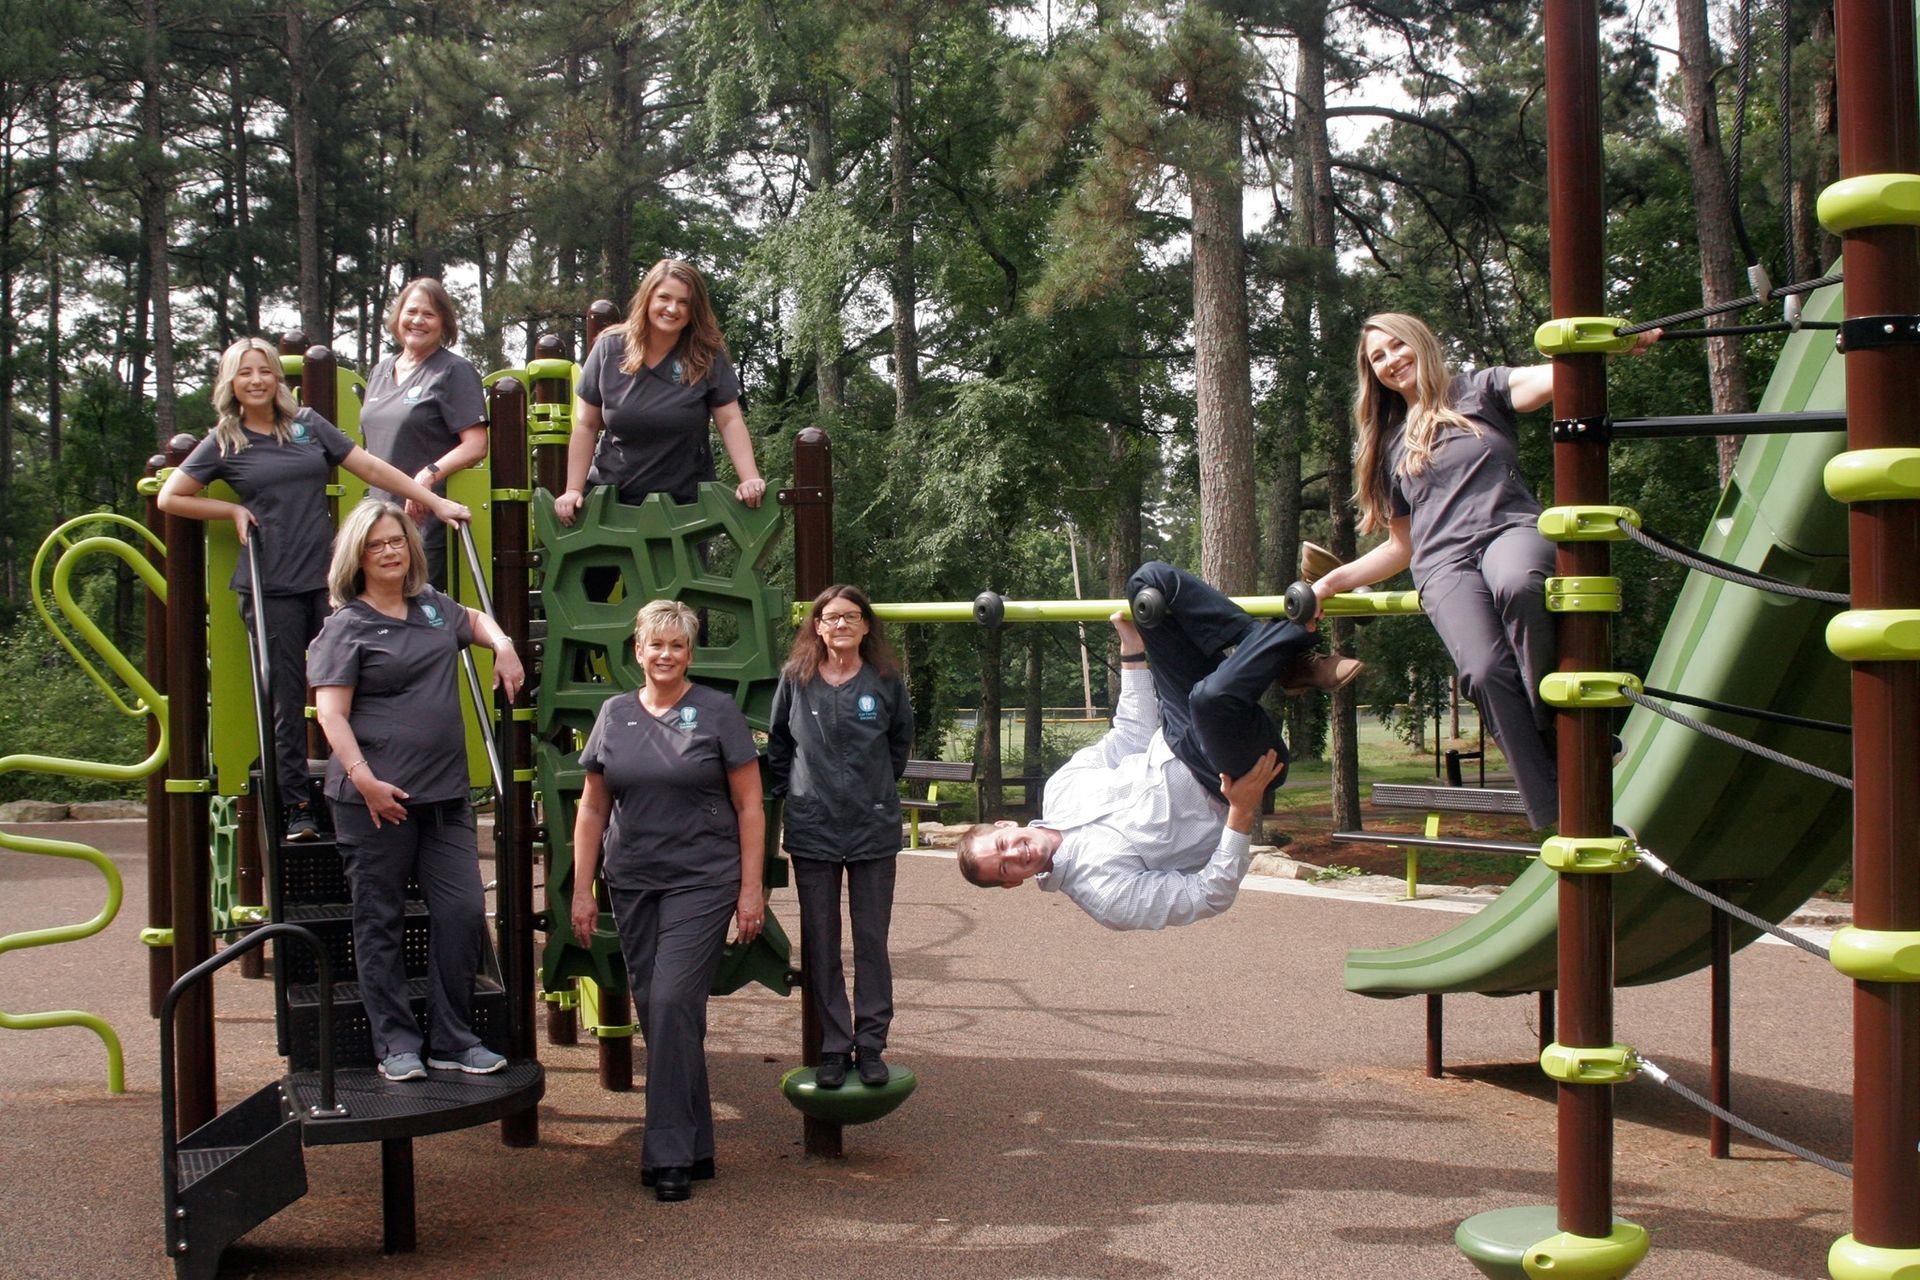 a group of people are posing for a picture on a playground